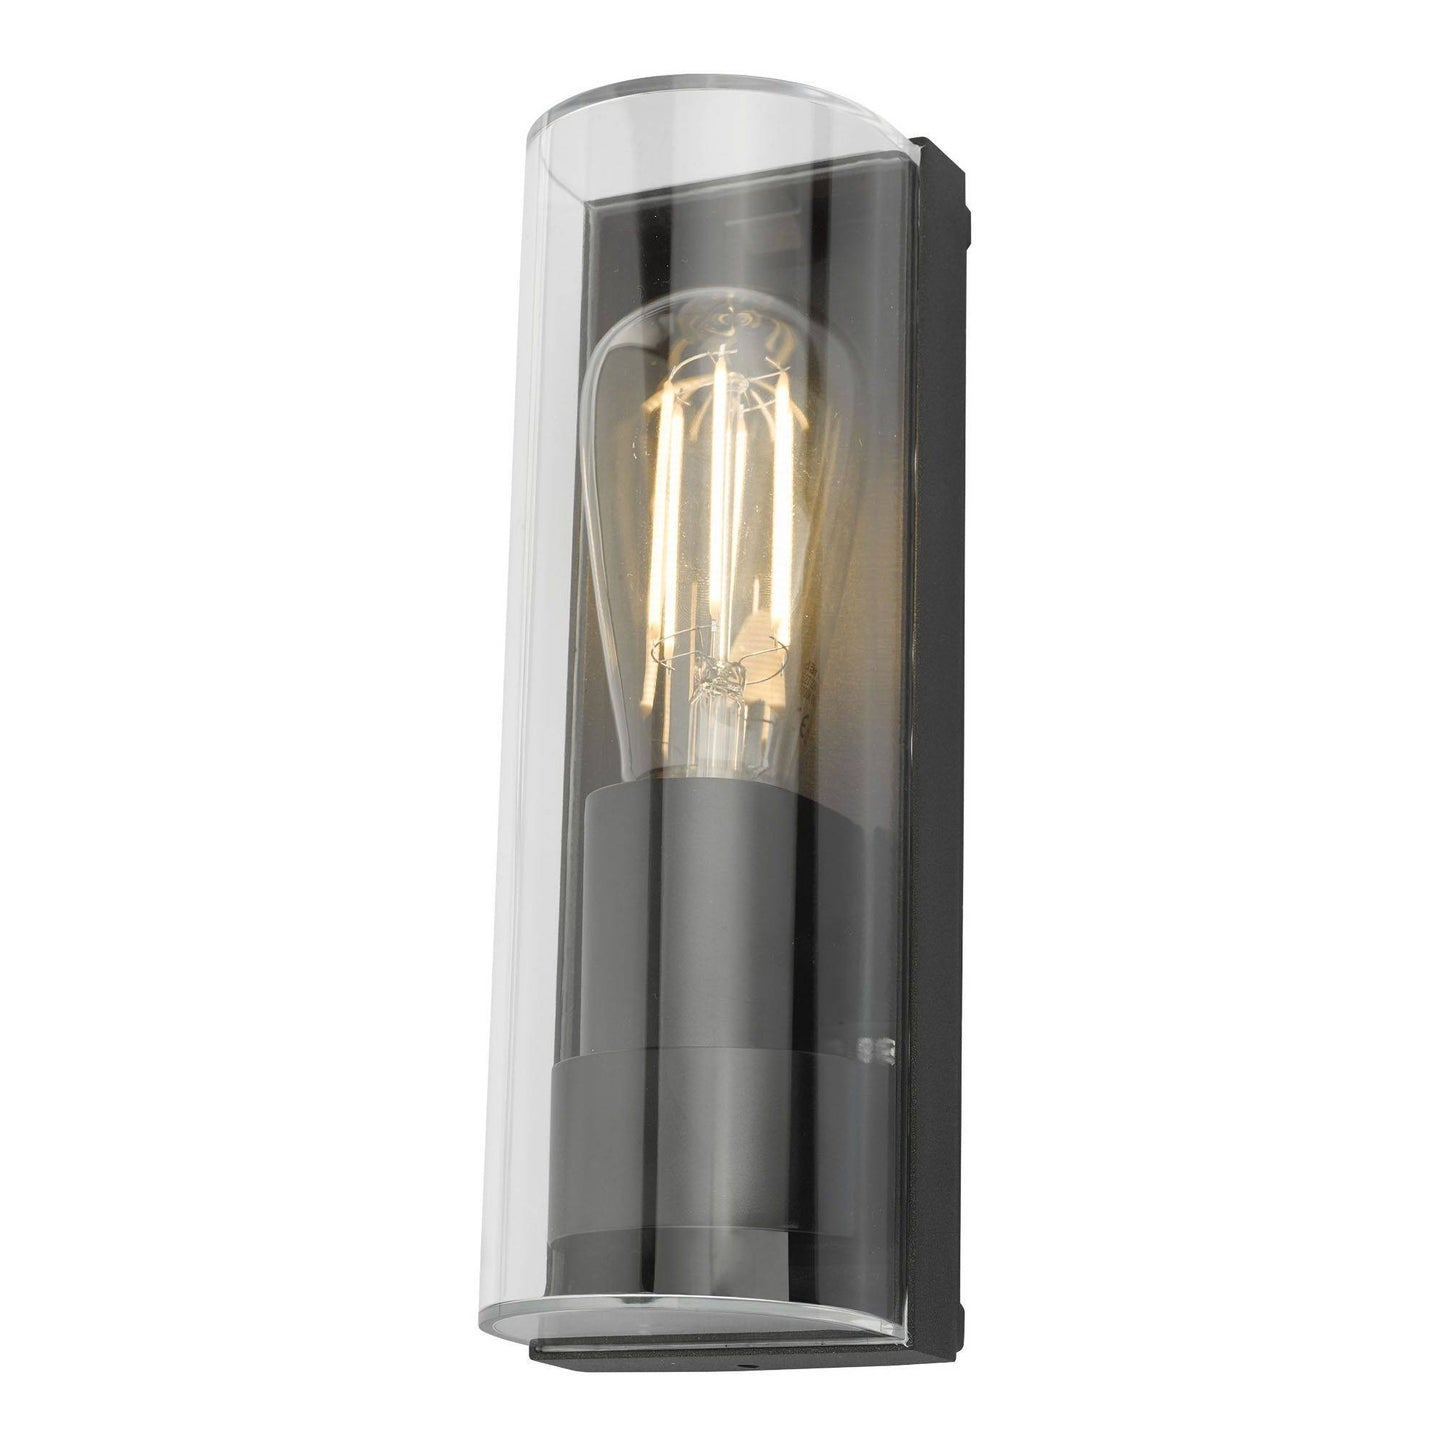 Quenby Anthracite IP65 Outdoor Wall Light